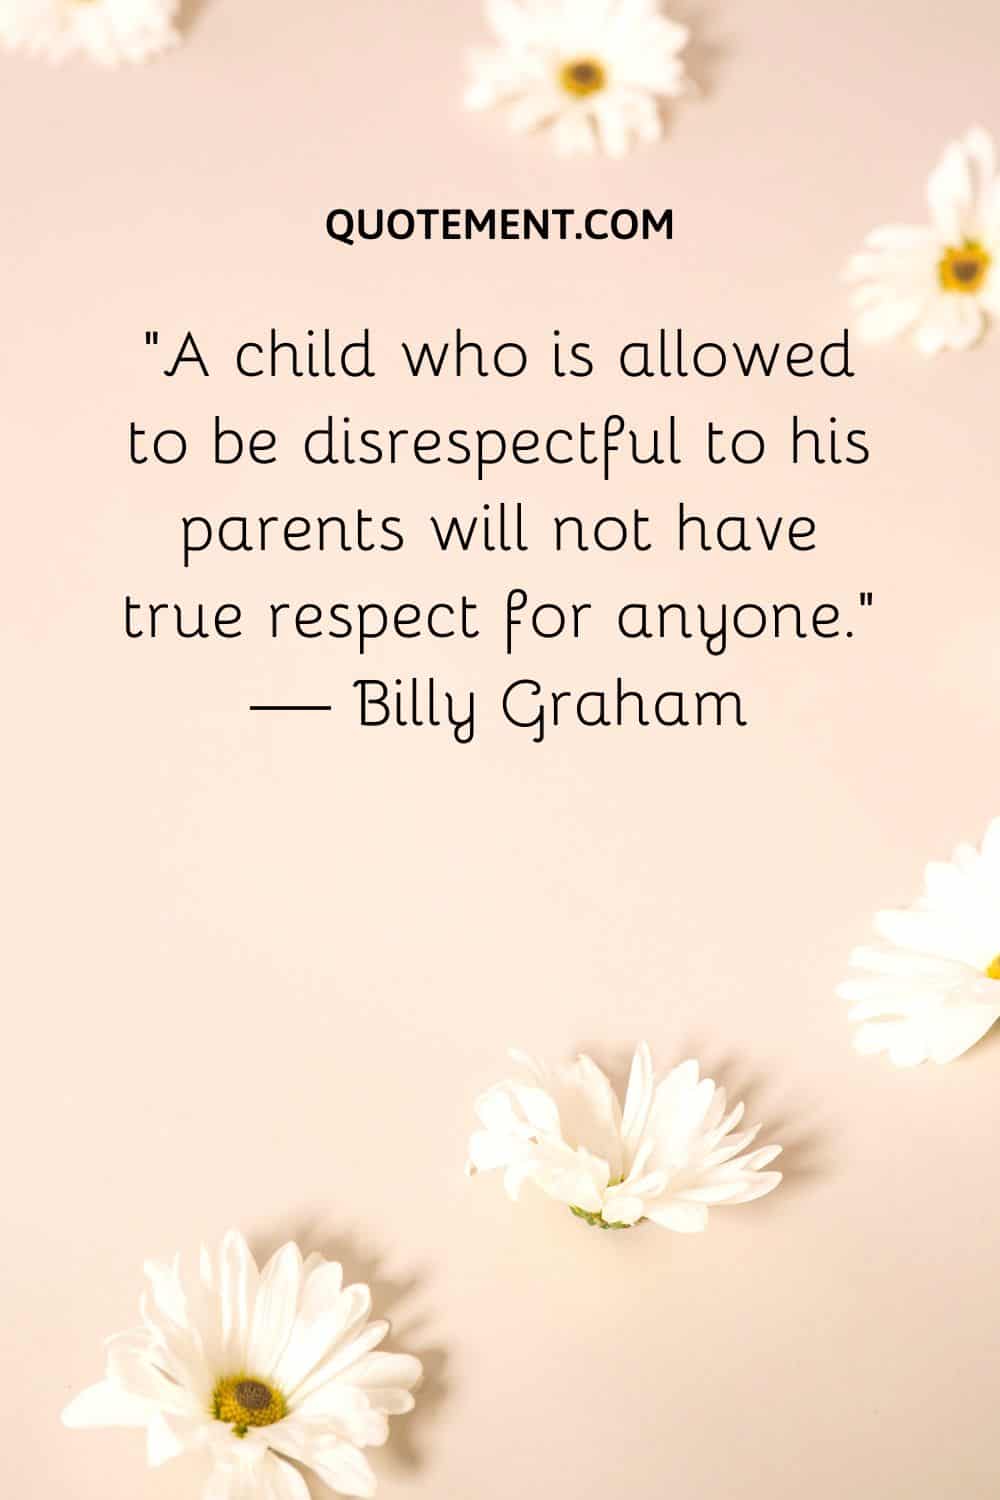 A child who is allowed to be disrespectful to his parents will not have true respect for anyone